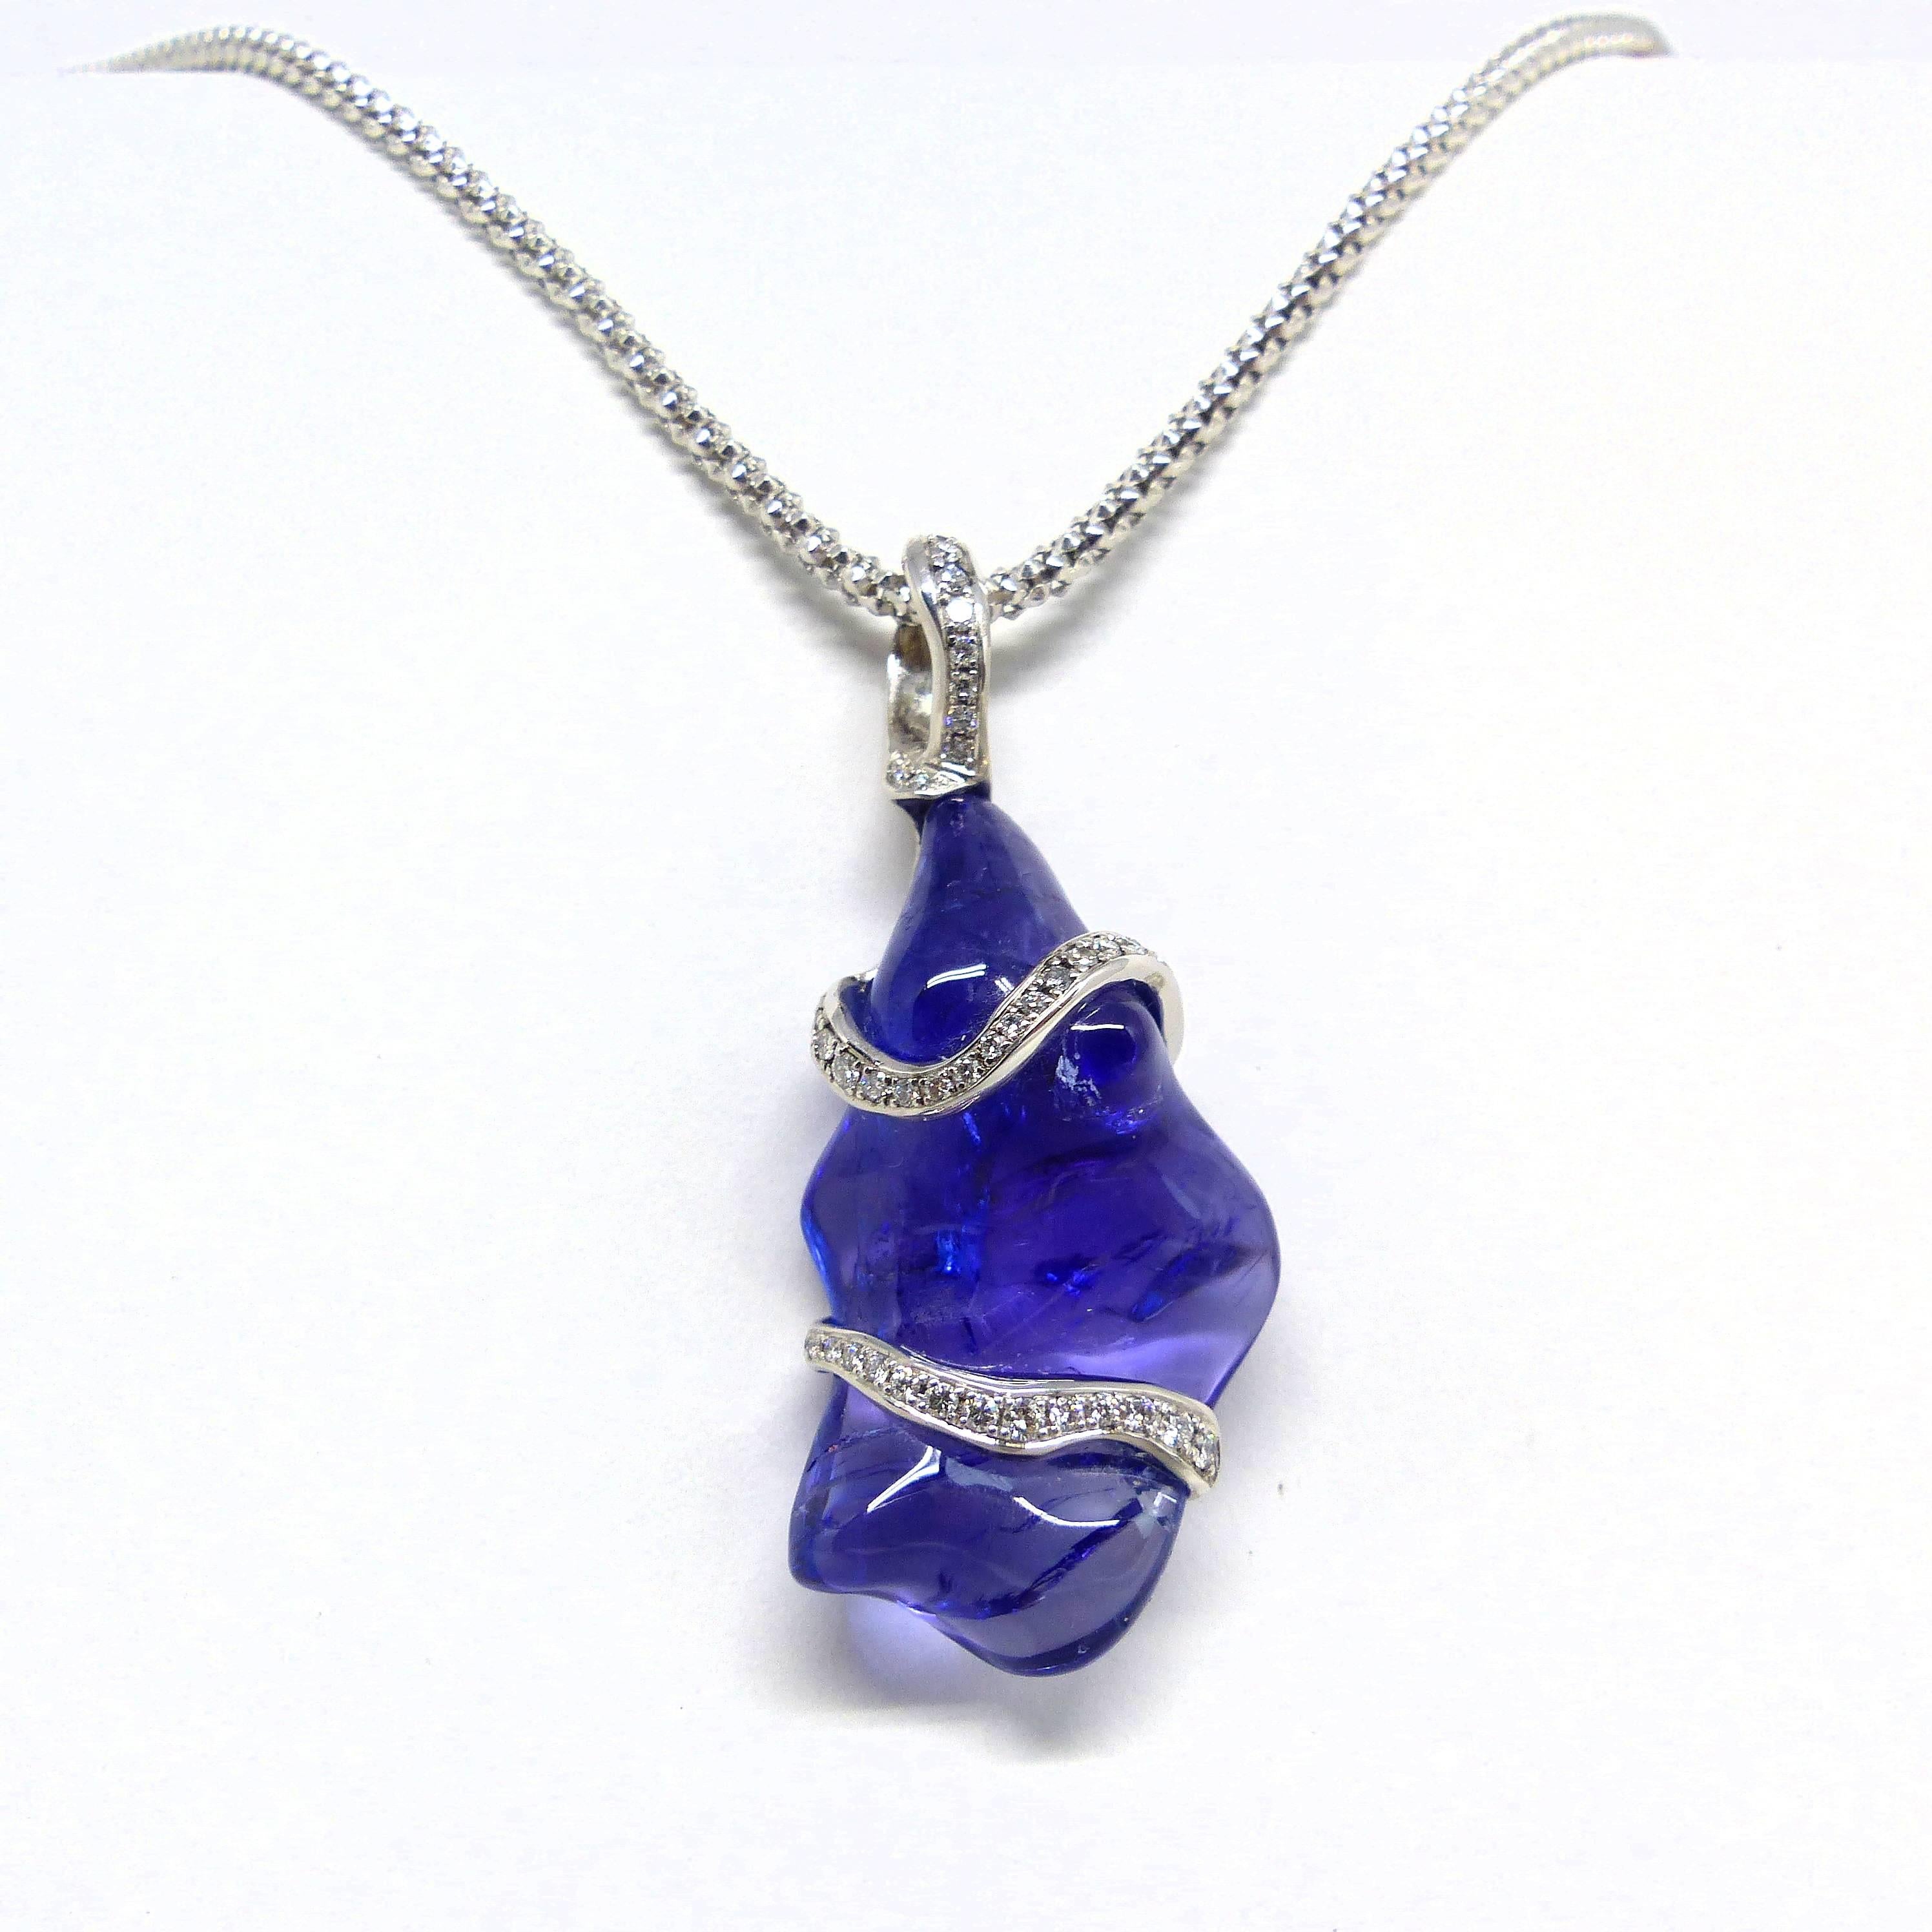 Thomas Leyser is renowned for his contemporary jewellery designs utilizing fine gemstones. 
	
This 18k white gold (4,26gr.) pendant is set with 1 top quality Tanzanite freeschape, 35,35cts., accentuated by 43 diamonds 0,38cts., brillant cut round